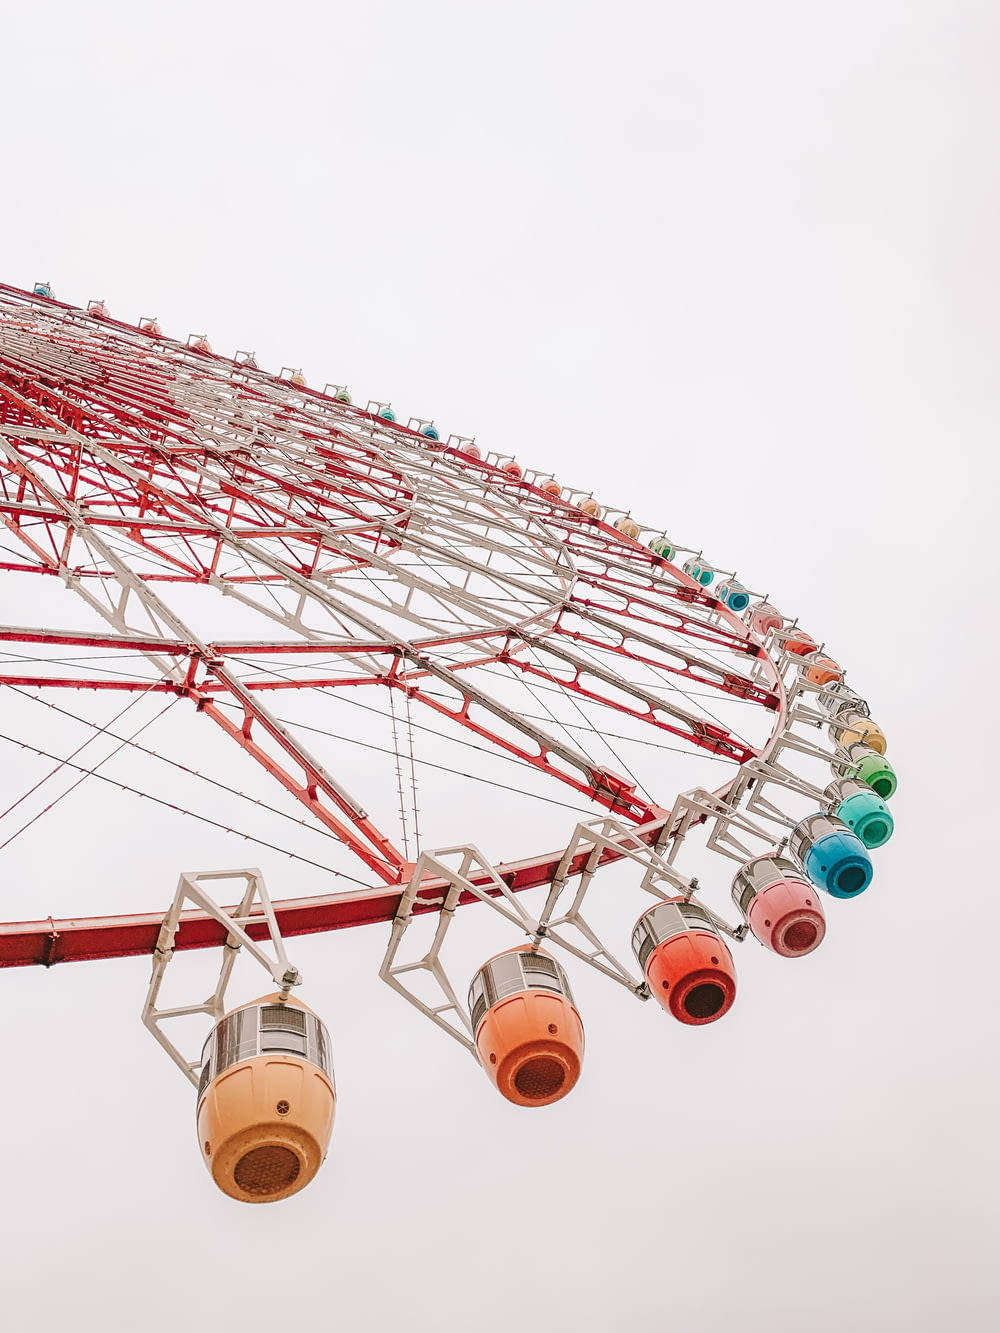 red and multicolored ferris wheel close-up photography